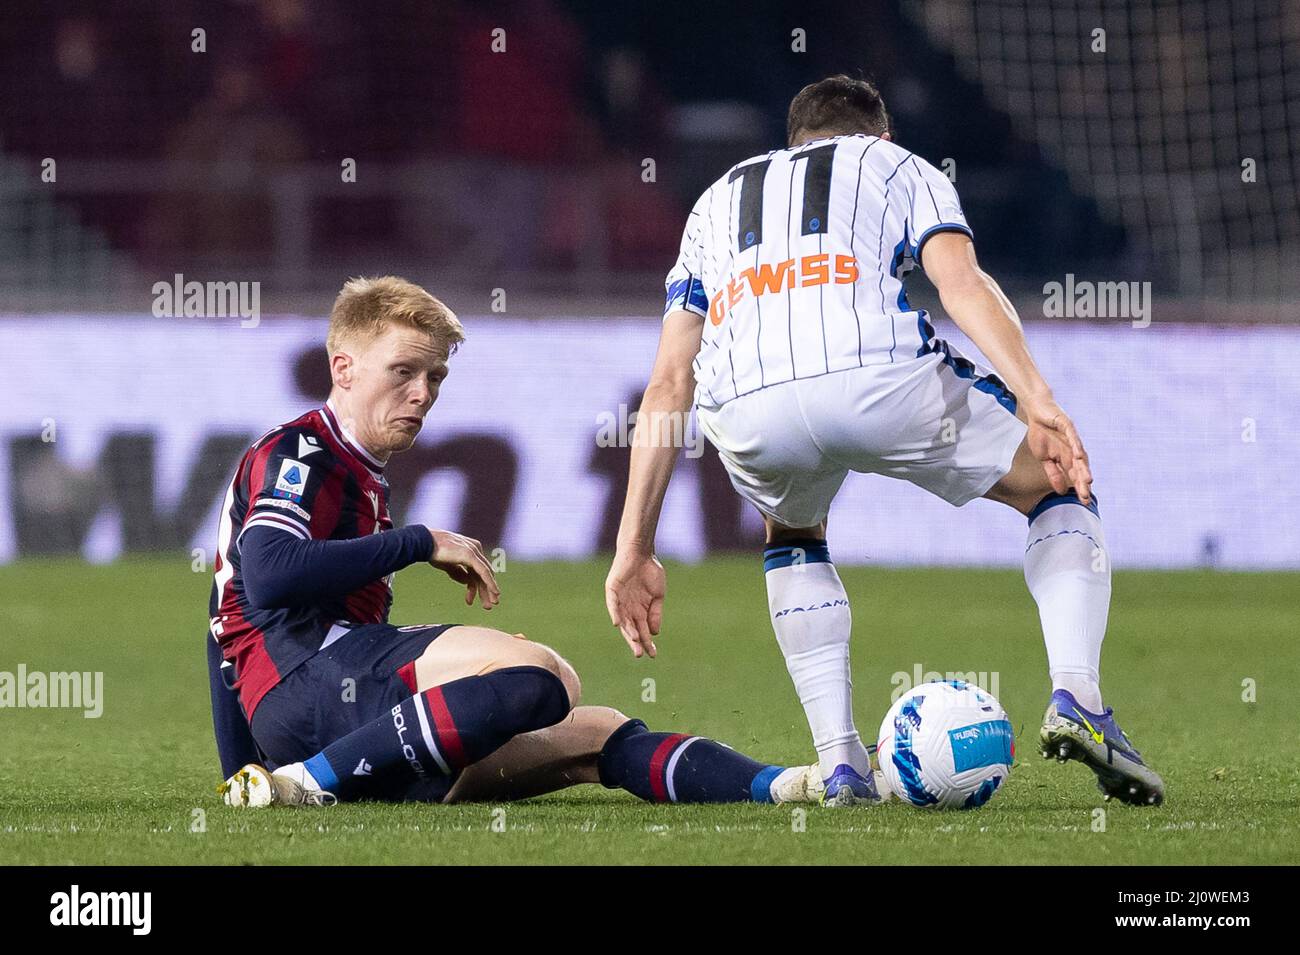 Bologna, Italy. 20 March, 2022. Jerdy Schouten of Bologna FC competes for the ball with Remo Freuler of Atalanta BC  during the Serie A match between Bologna FC and Atalanta BC at Stadio Renato Dall'Ara on March 20, 2022. Credit: Ciancaphoto Studio/Alamy Live News Stock Photo